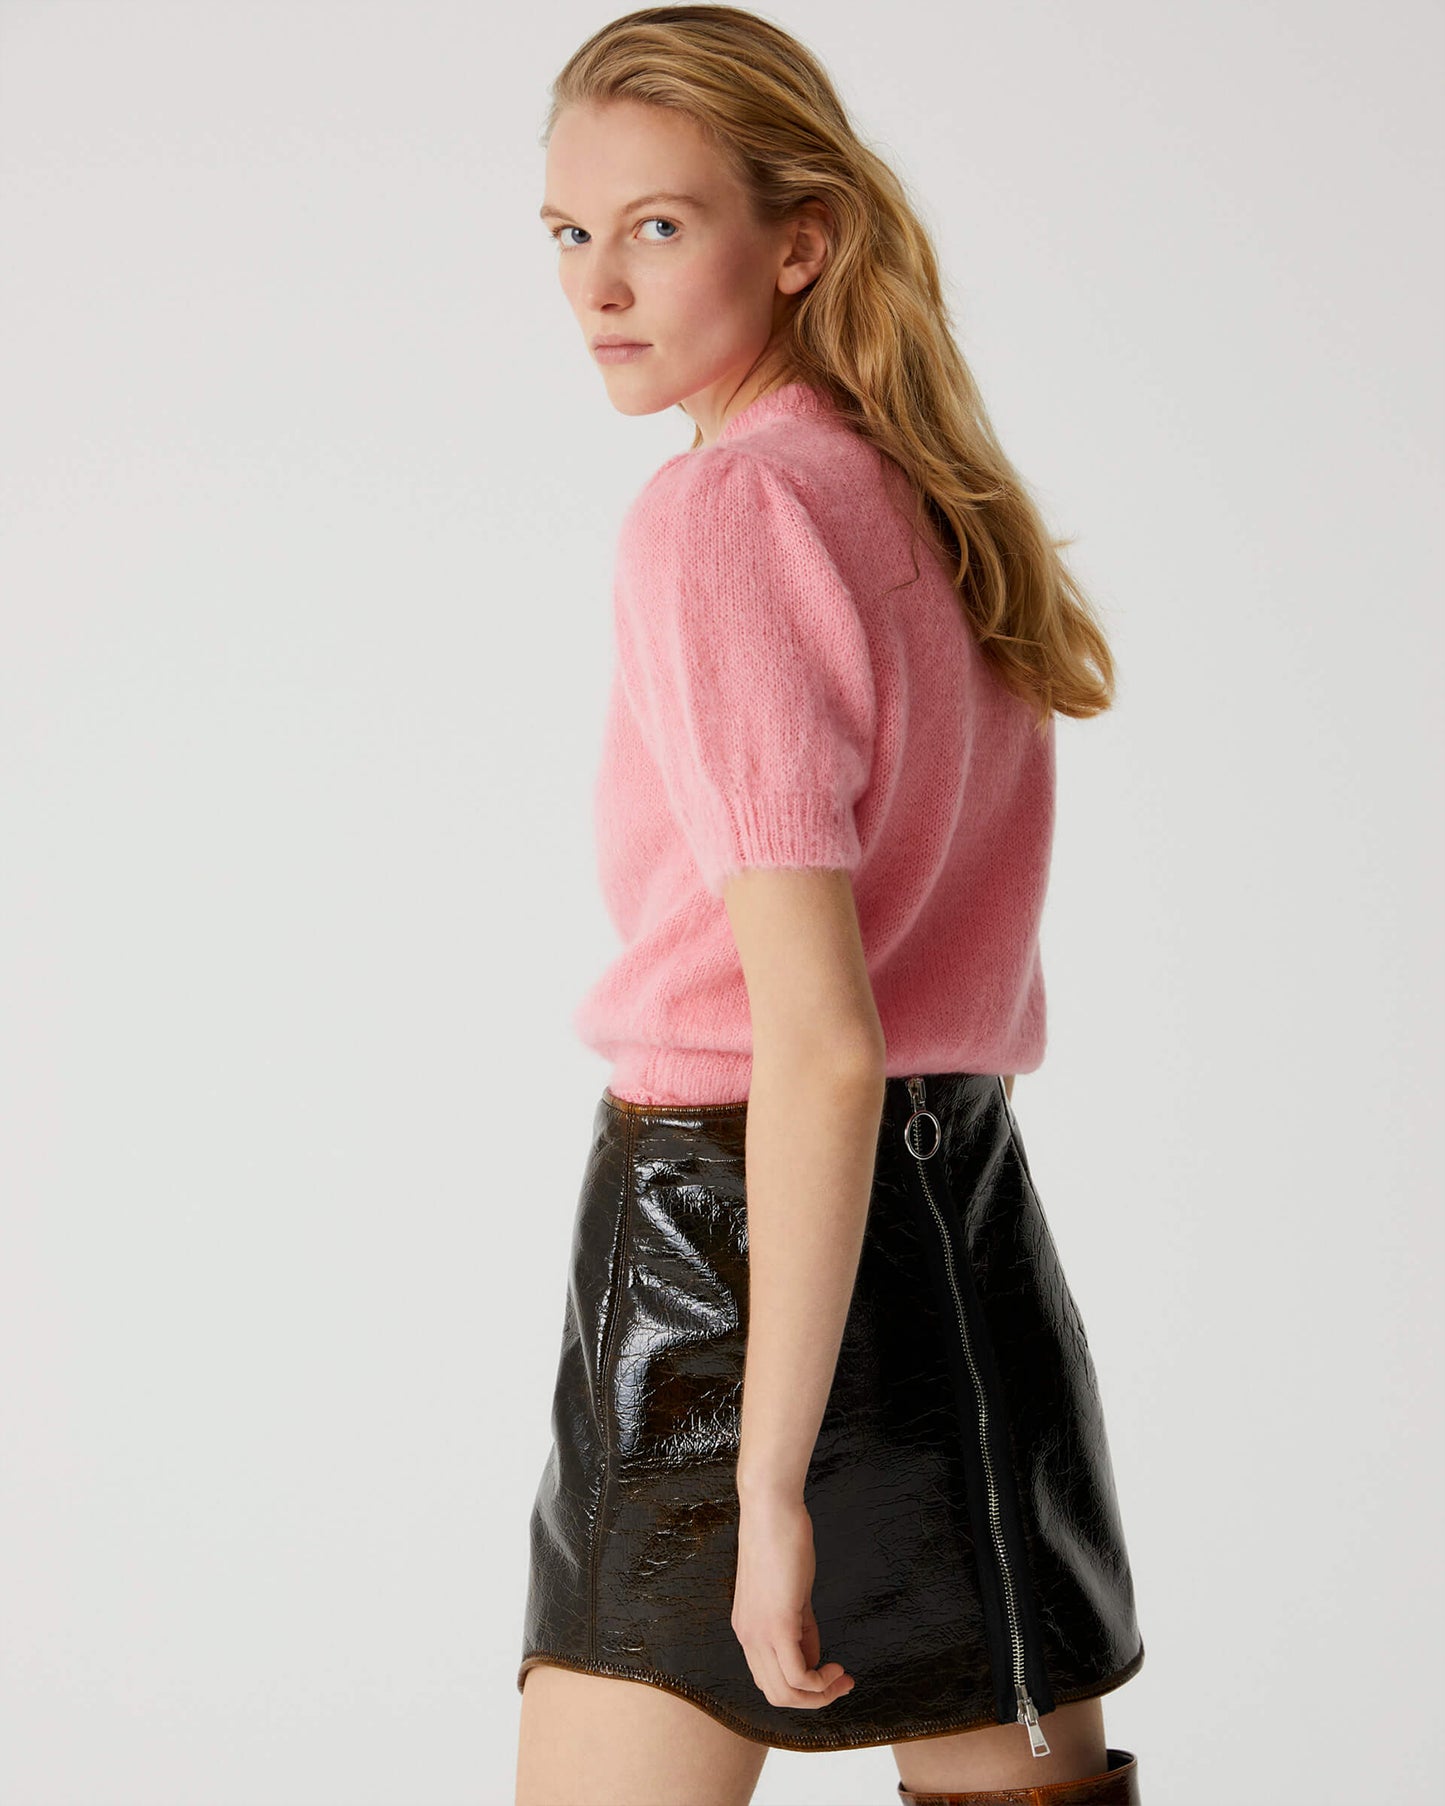 BEATRICE.B Puff Sleeve Cropped Sweater in Pink